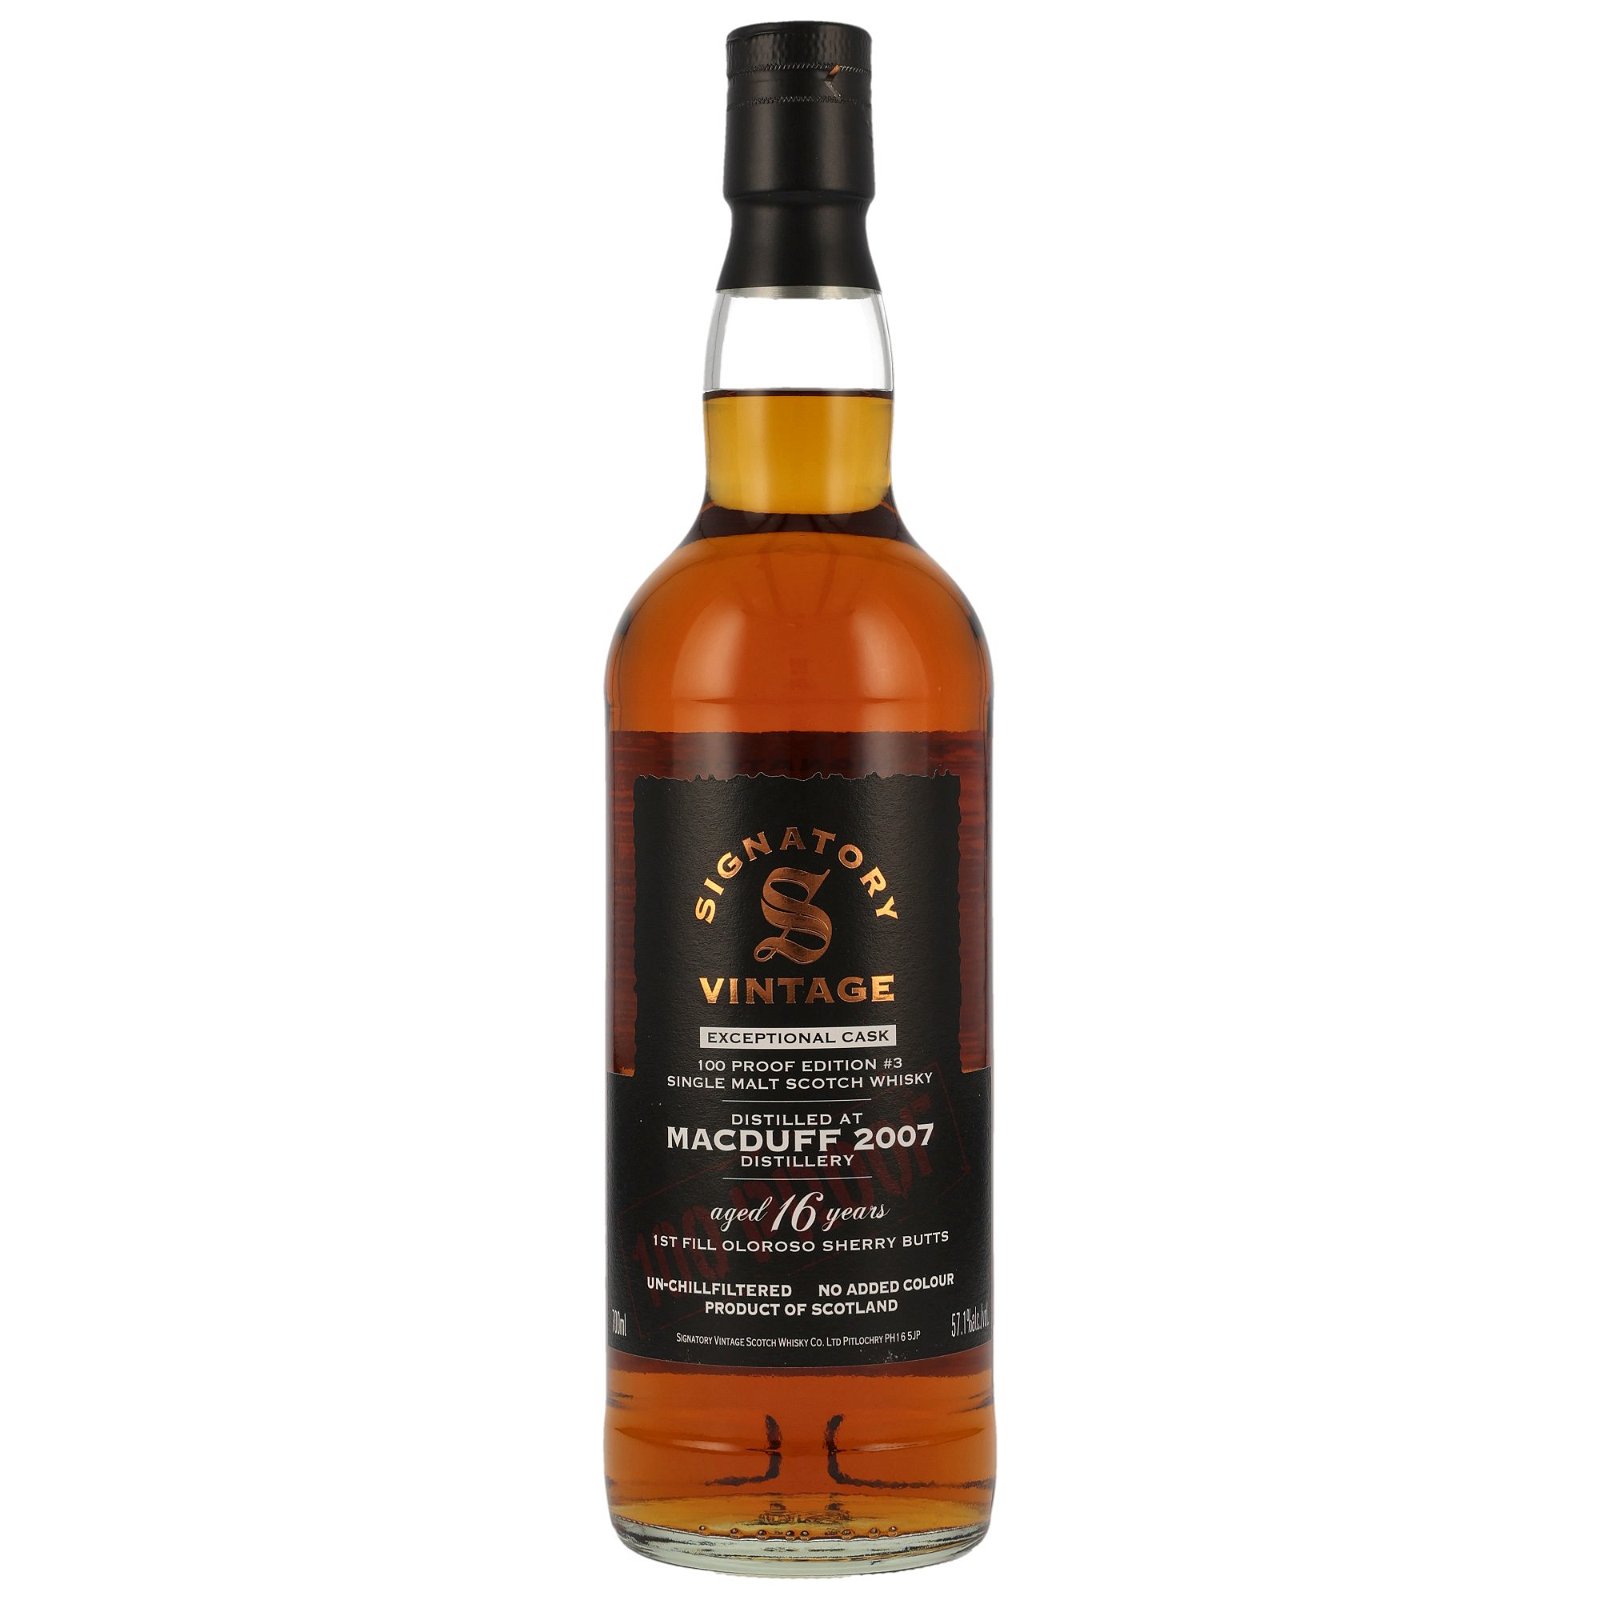 Macduff 2007 - 16 Jahre 1st Fill Oloroso Sherry Butts 100 Proof Exceptional Cask Edition #3 (Signatory)